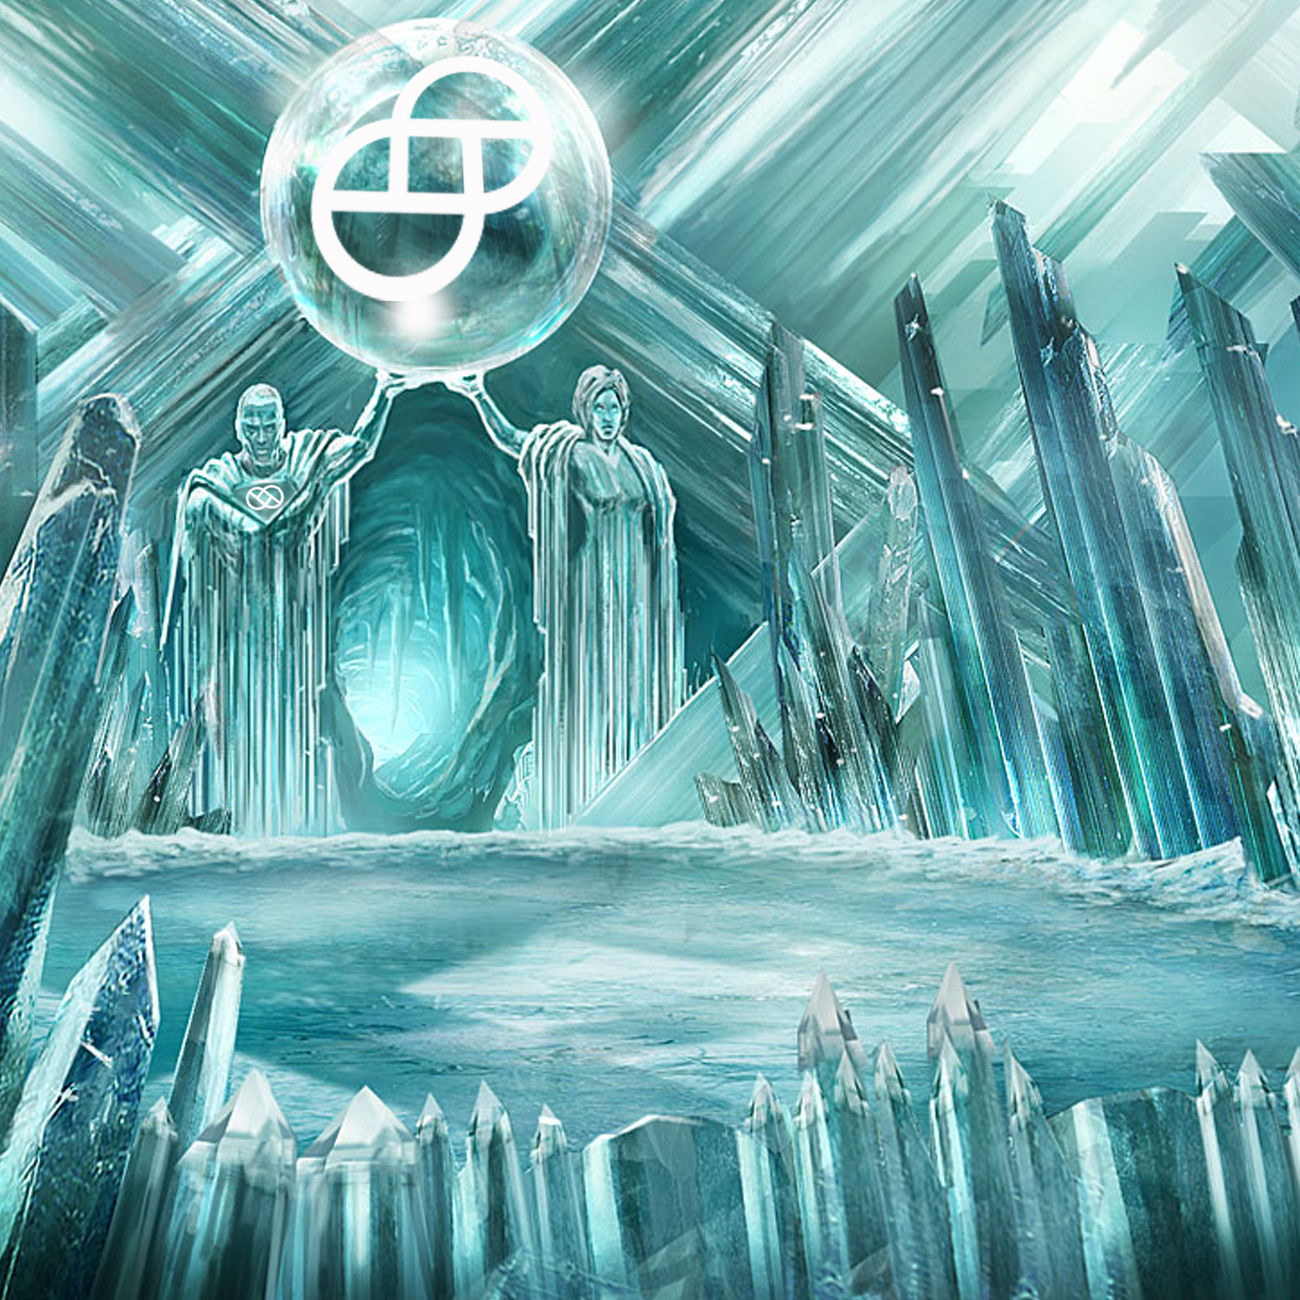 Gemini Dollar Code Review Reveals the Stablecoin's Accounts Can Be Frozen